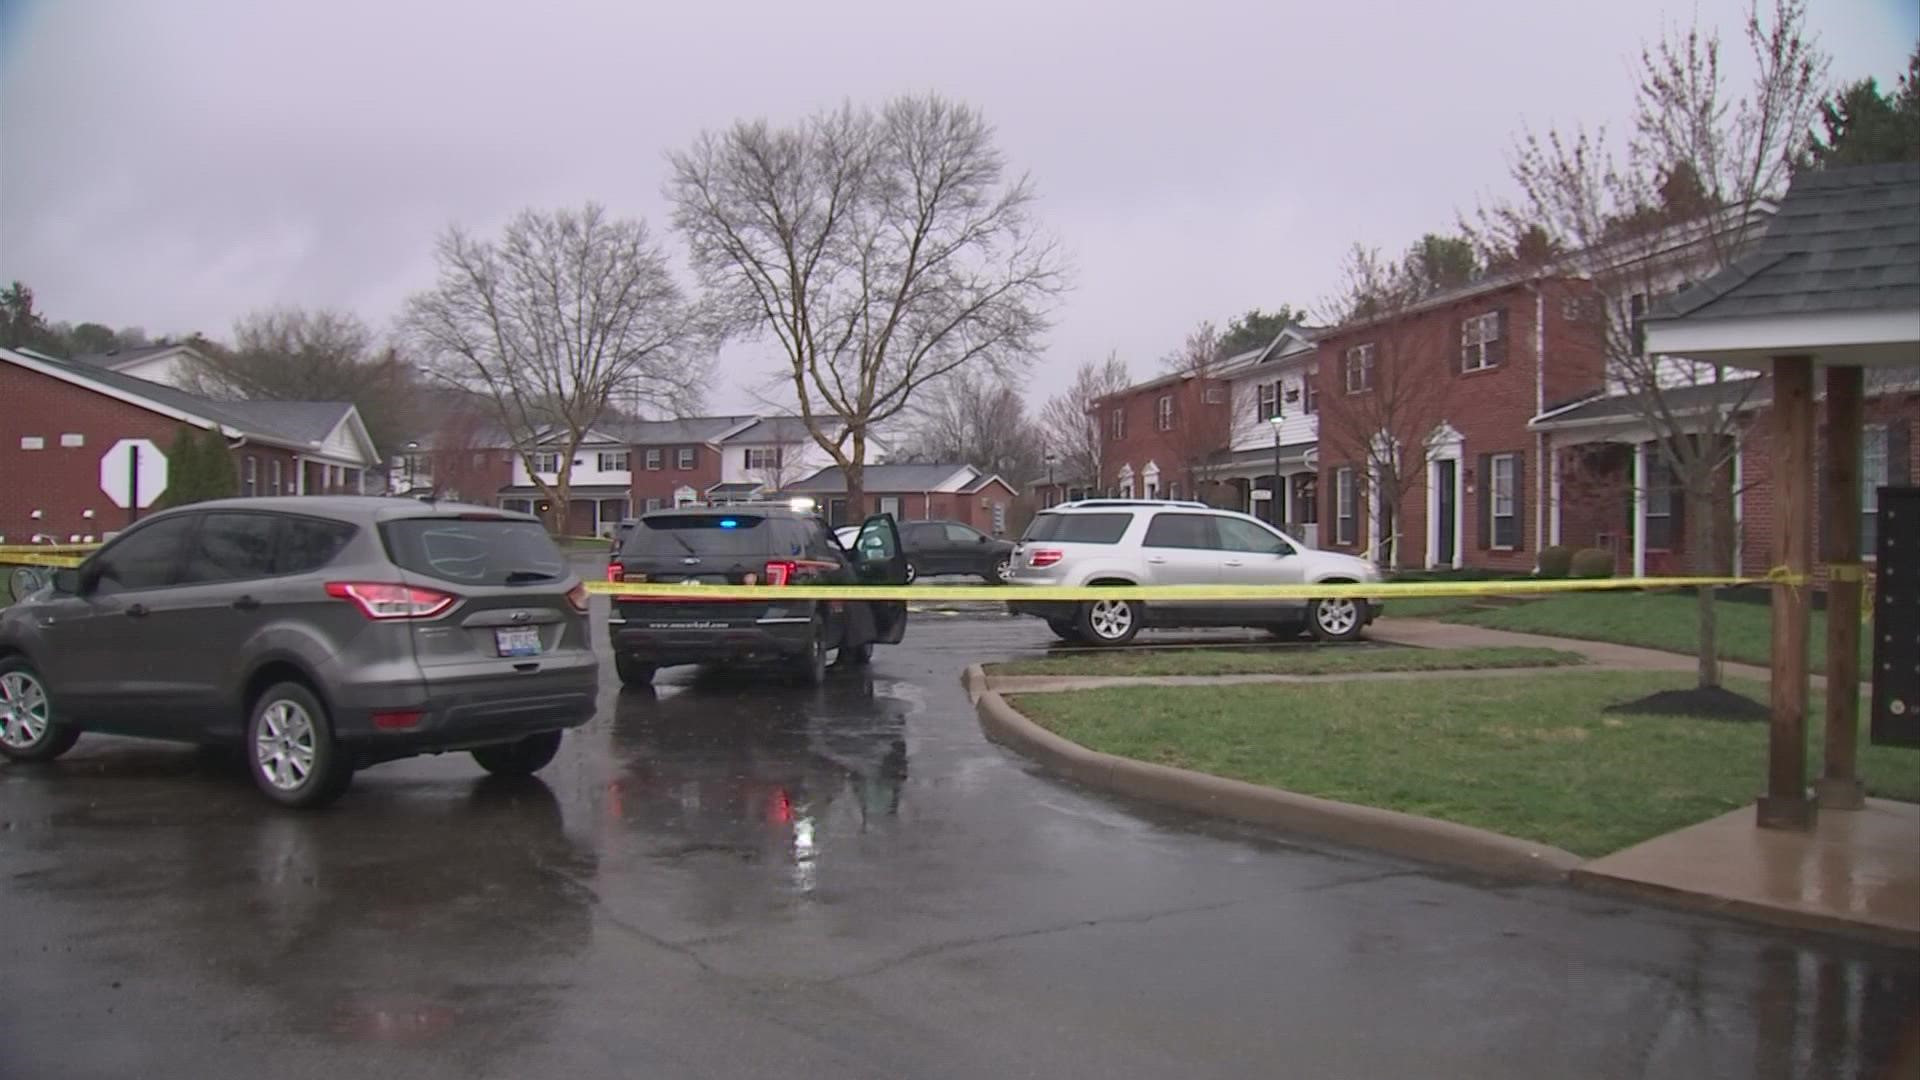 Officers were called to the stabbing scene on Glenbrook Drive before 5 p.m. on Wednesday.